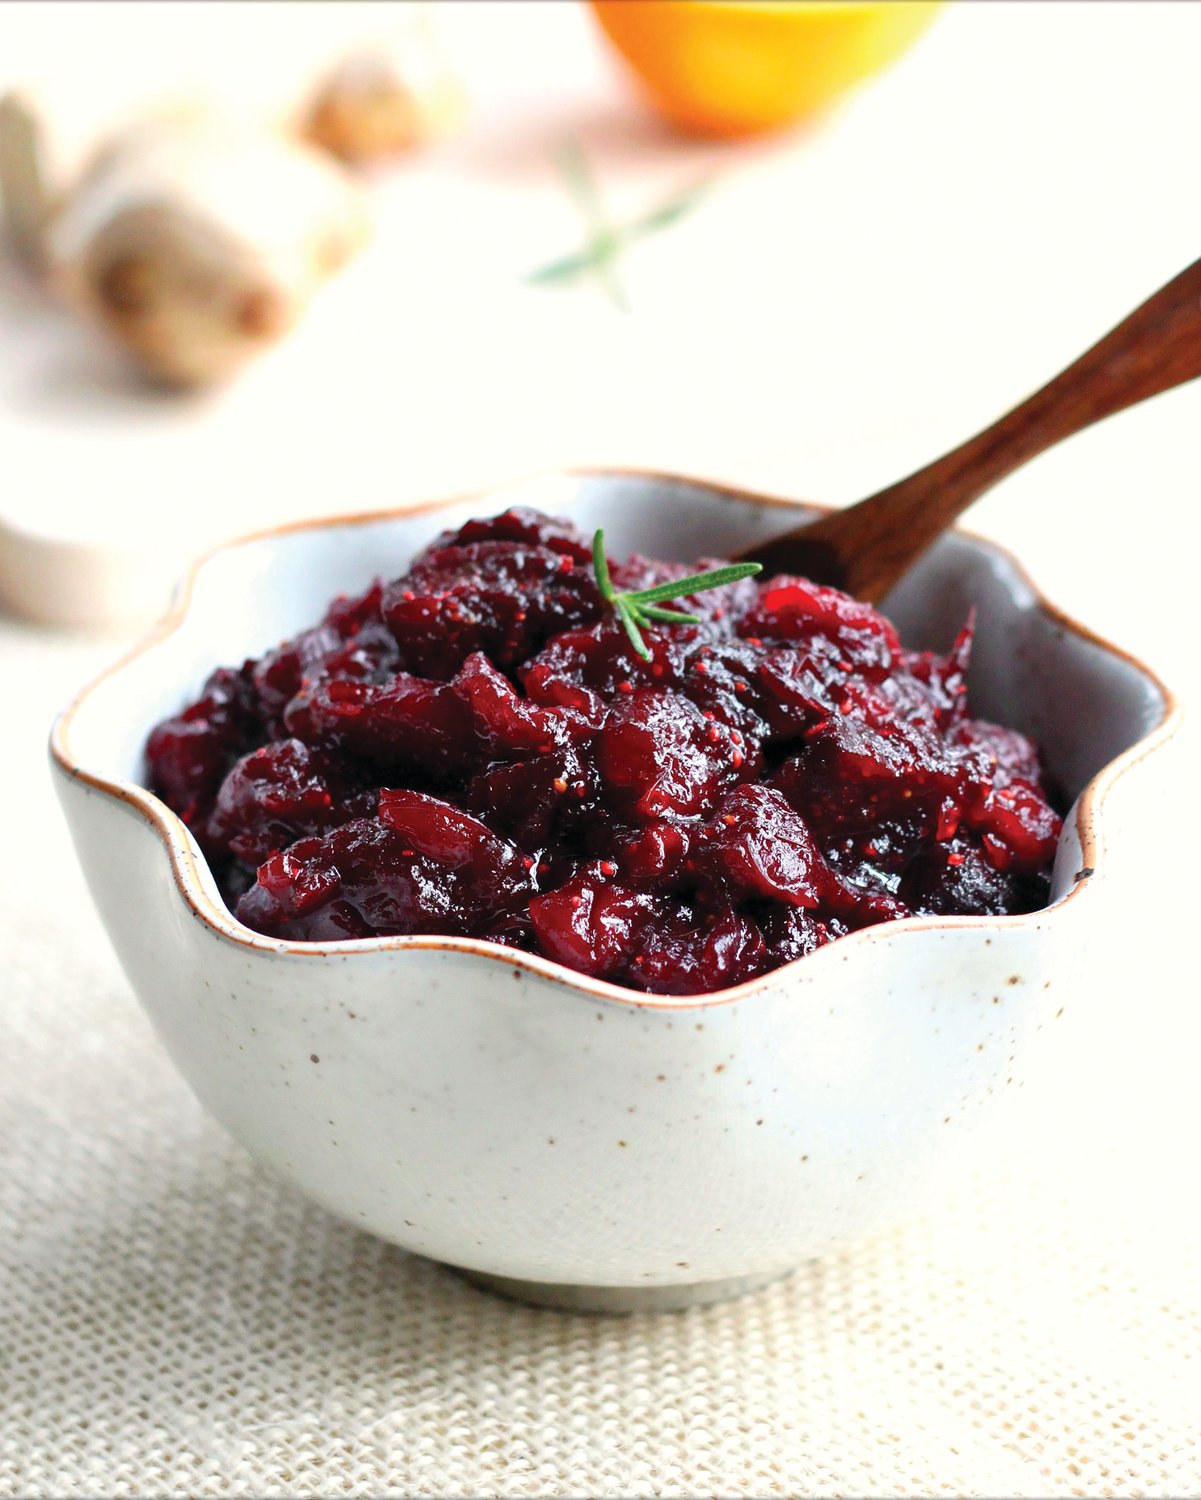 Tradition has it that a Thanksgiving turkey dinner is not complete without cranberry sauce.